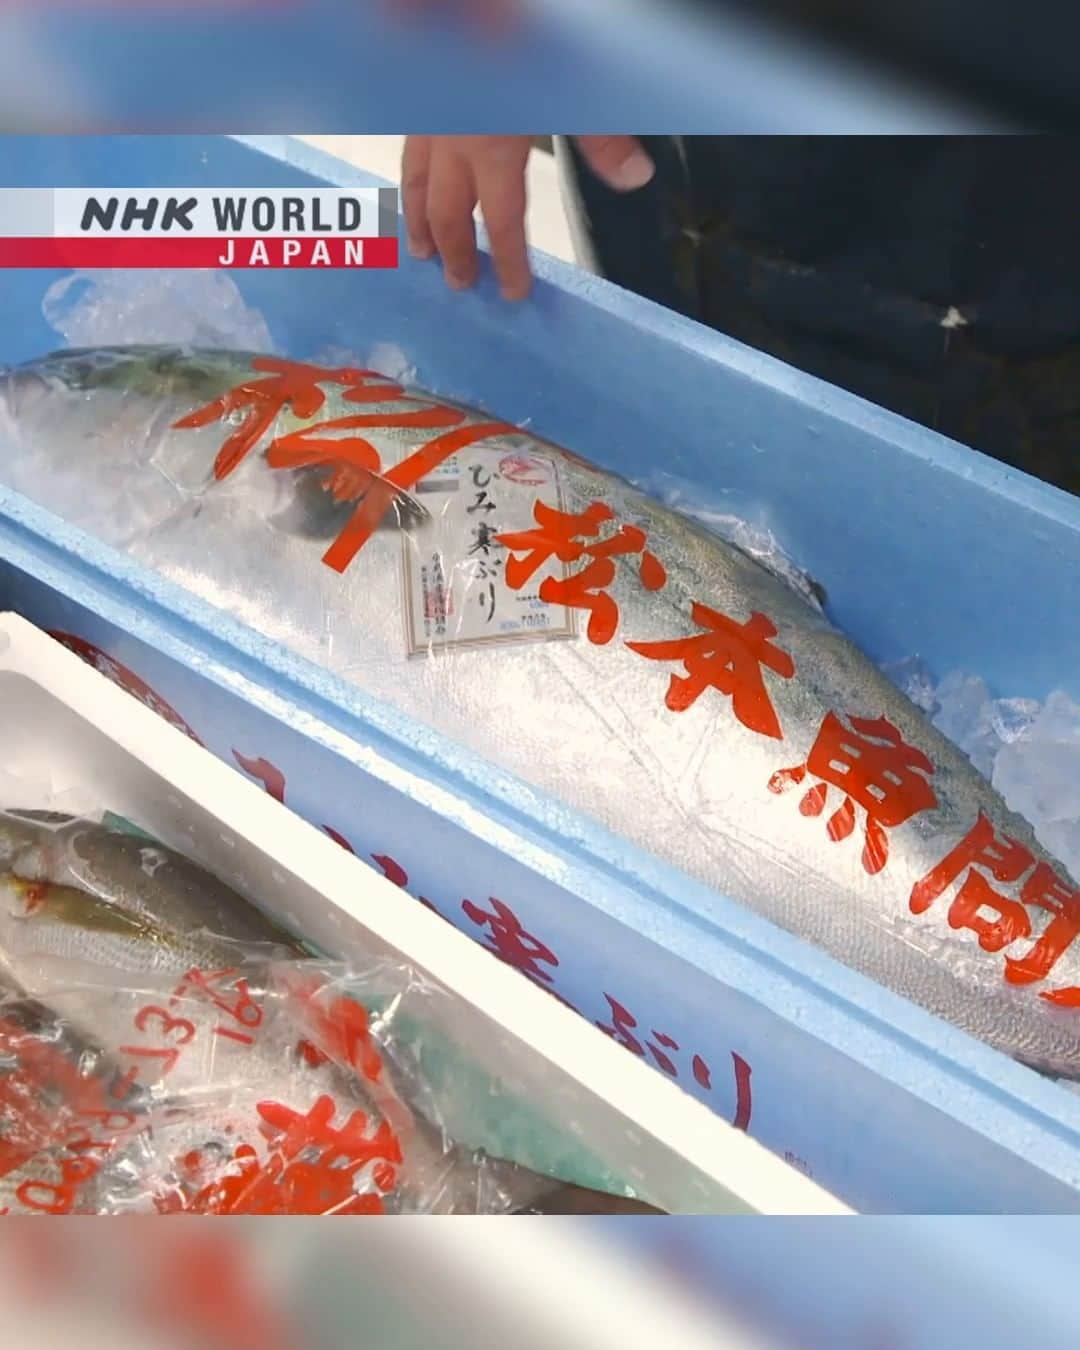 NHK「WORLD-JAPAN」のインスタグラム：「Yellowtail is called ‘buri’ in Japanese.🐟  In western Japan the fish has long been thought to bring good fortune and is an essential part of New Year traditions.  It’s especially favored in winter when it has a higher fat content. In Japanese cuisine, it is eaten grilled, simmered or raw as sushi or sashimi.😋🍣 . 👉Watch｜Trails to Oishii Tokyo: BURI｜Free On Demand｜NHK WORLD-JAPAN website.👀 . 👉Tap in Stories/Highlights to get there.👆 . 👉See the link in our bio for more on the latest from Japan. . 👉If we’re on your Favorites list you won’t miss a post. . . #umami #うま味 #buri #yellowtail #鰤 #japaneseamberjack #japanesefood #japanfish #toyosumarket #japanesingredients #visitjapan #hiddenjapan #discoverjapan #japanfoodie #tokyo #trailstooishiitokyo #nhkworldjapan #japan」